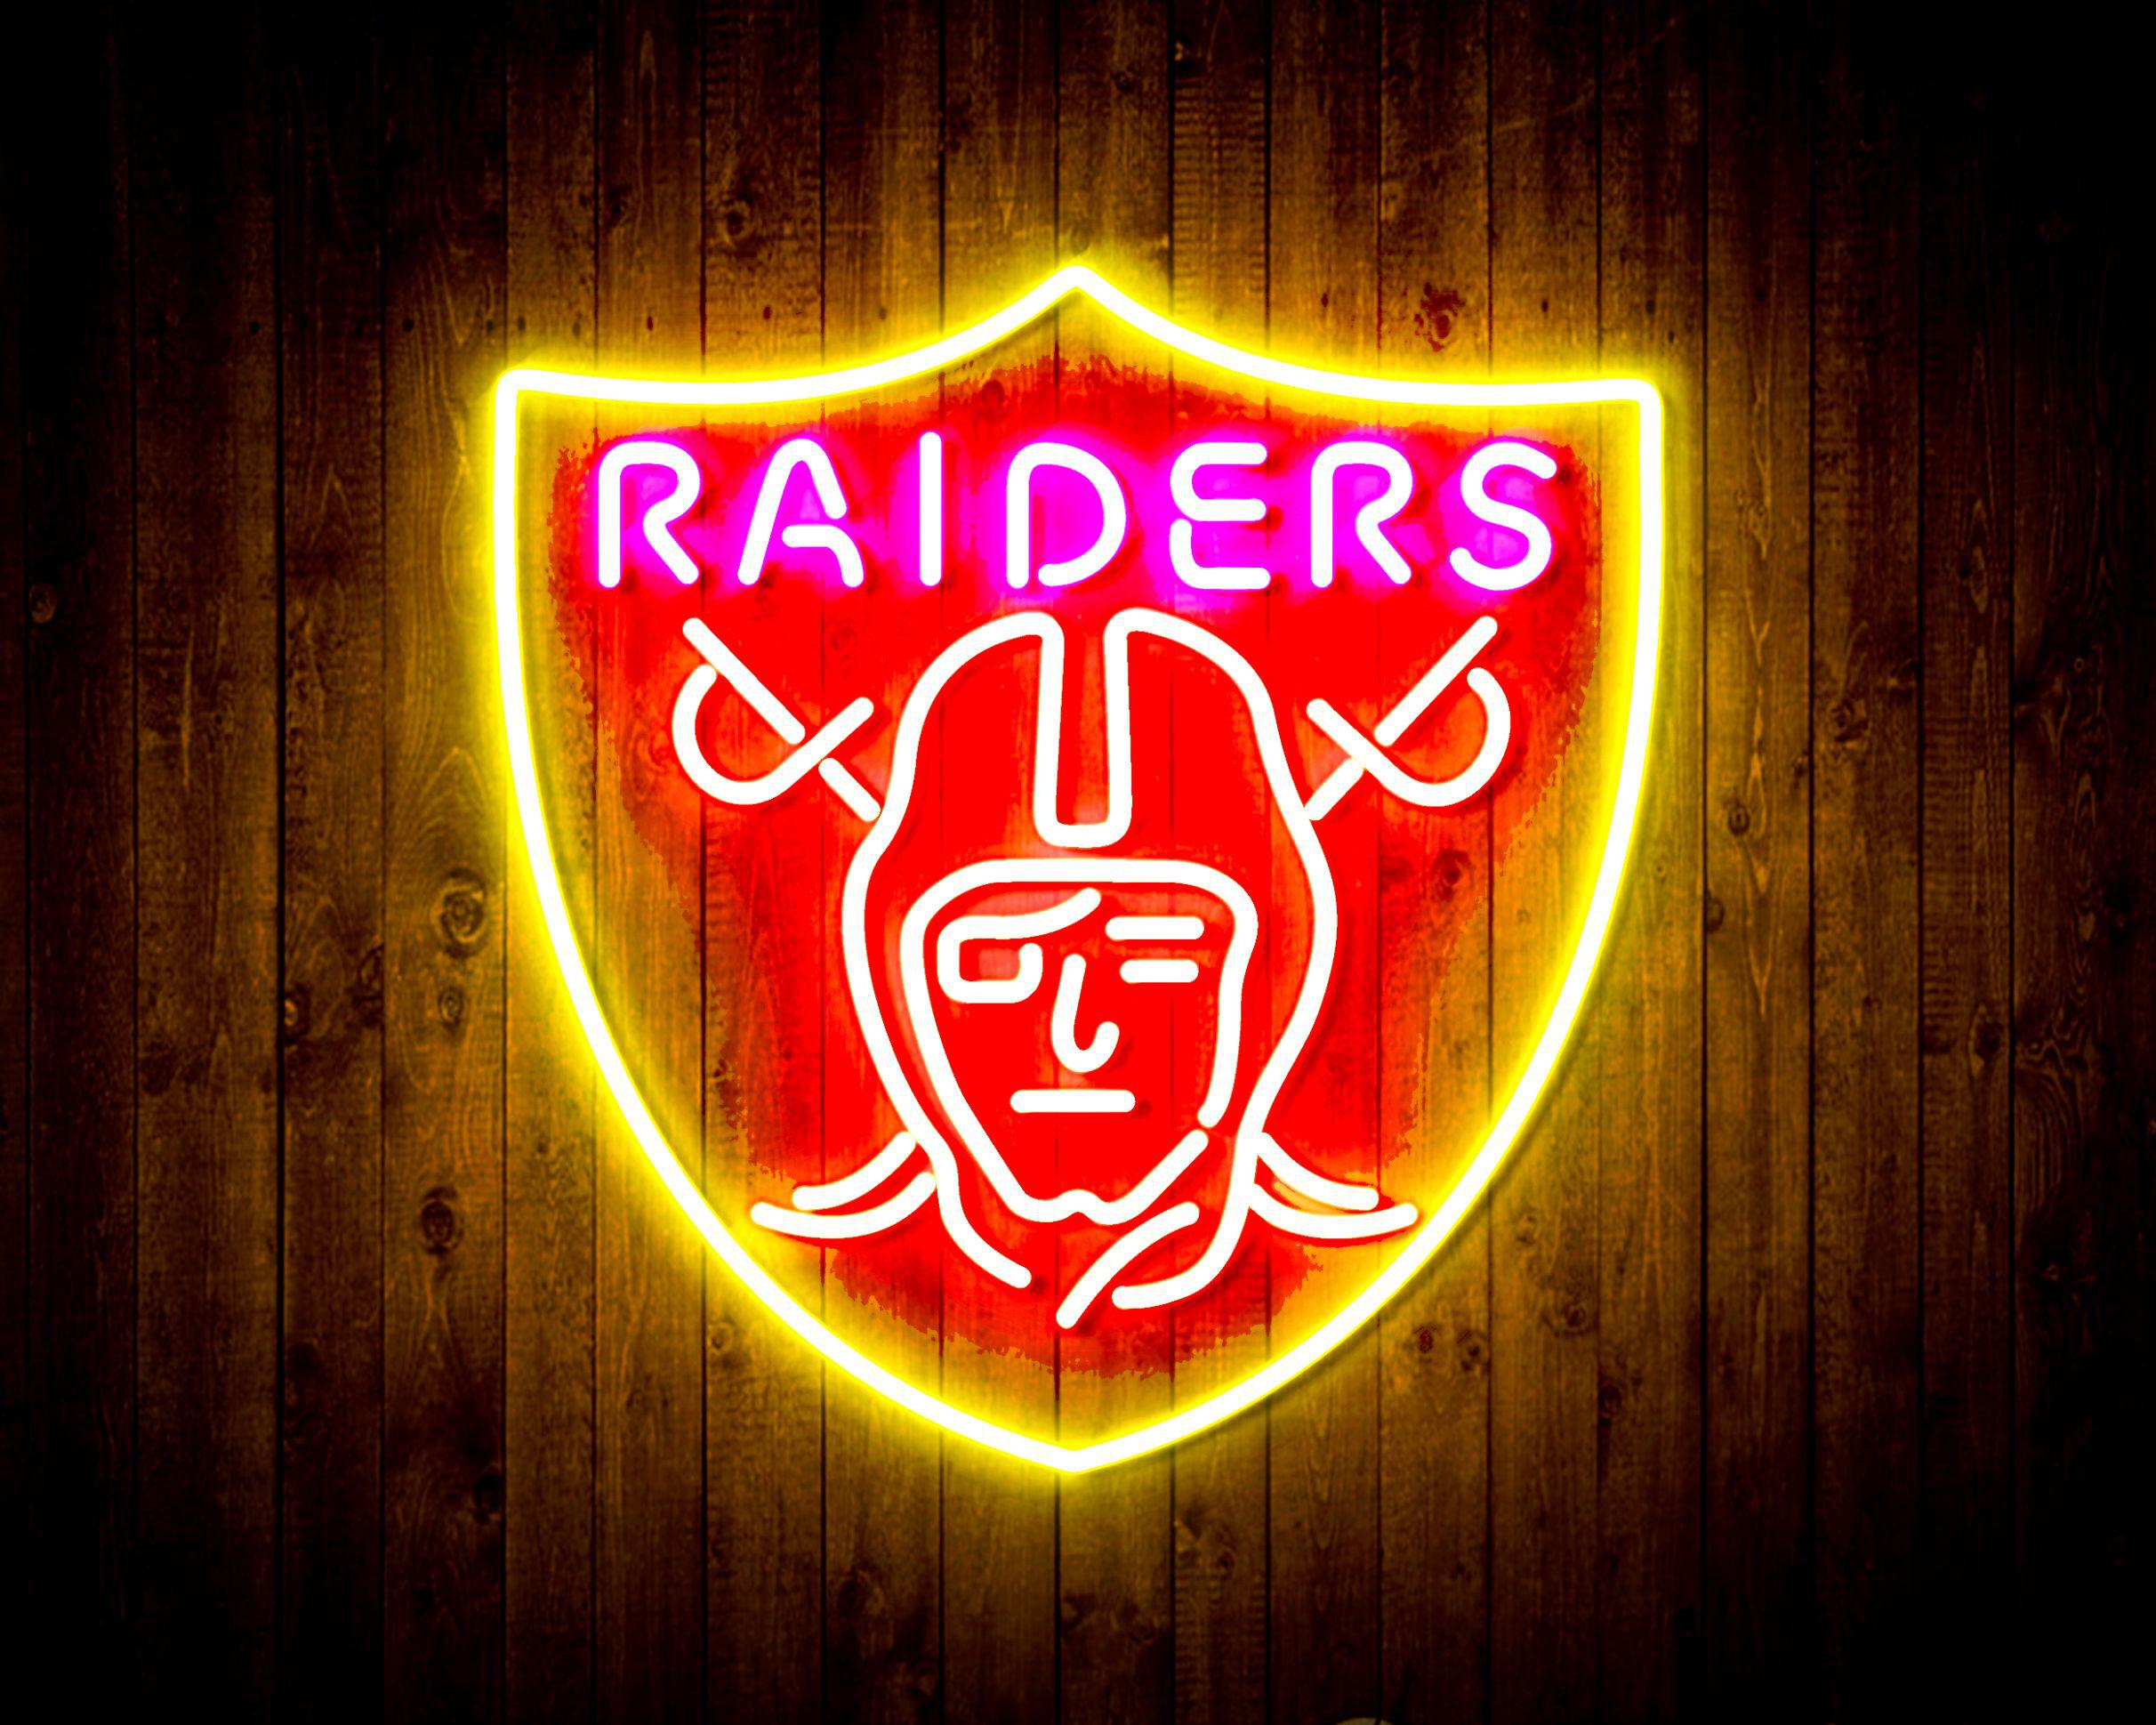 NFL LAS VEGAS RAIDERS LED Neon Sign for Game Room,Office,Bar,Man Cave. NEW!